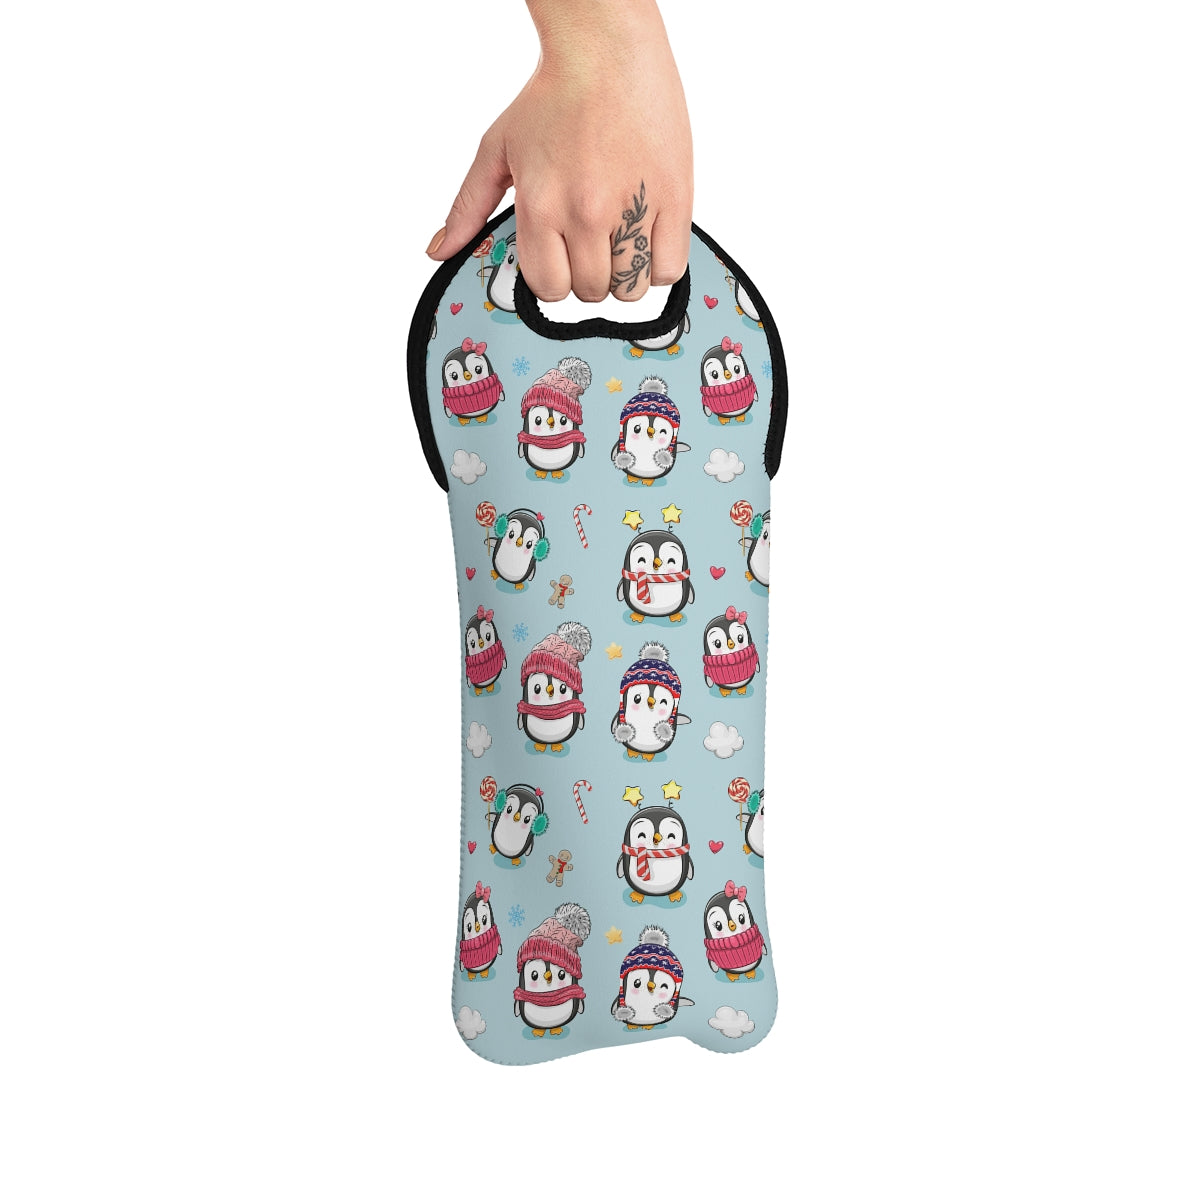 Penguins in Winter Clothes Wine Tote Bag